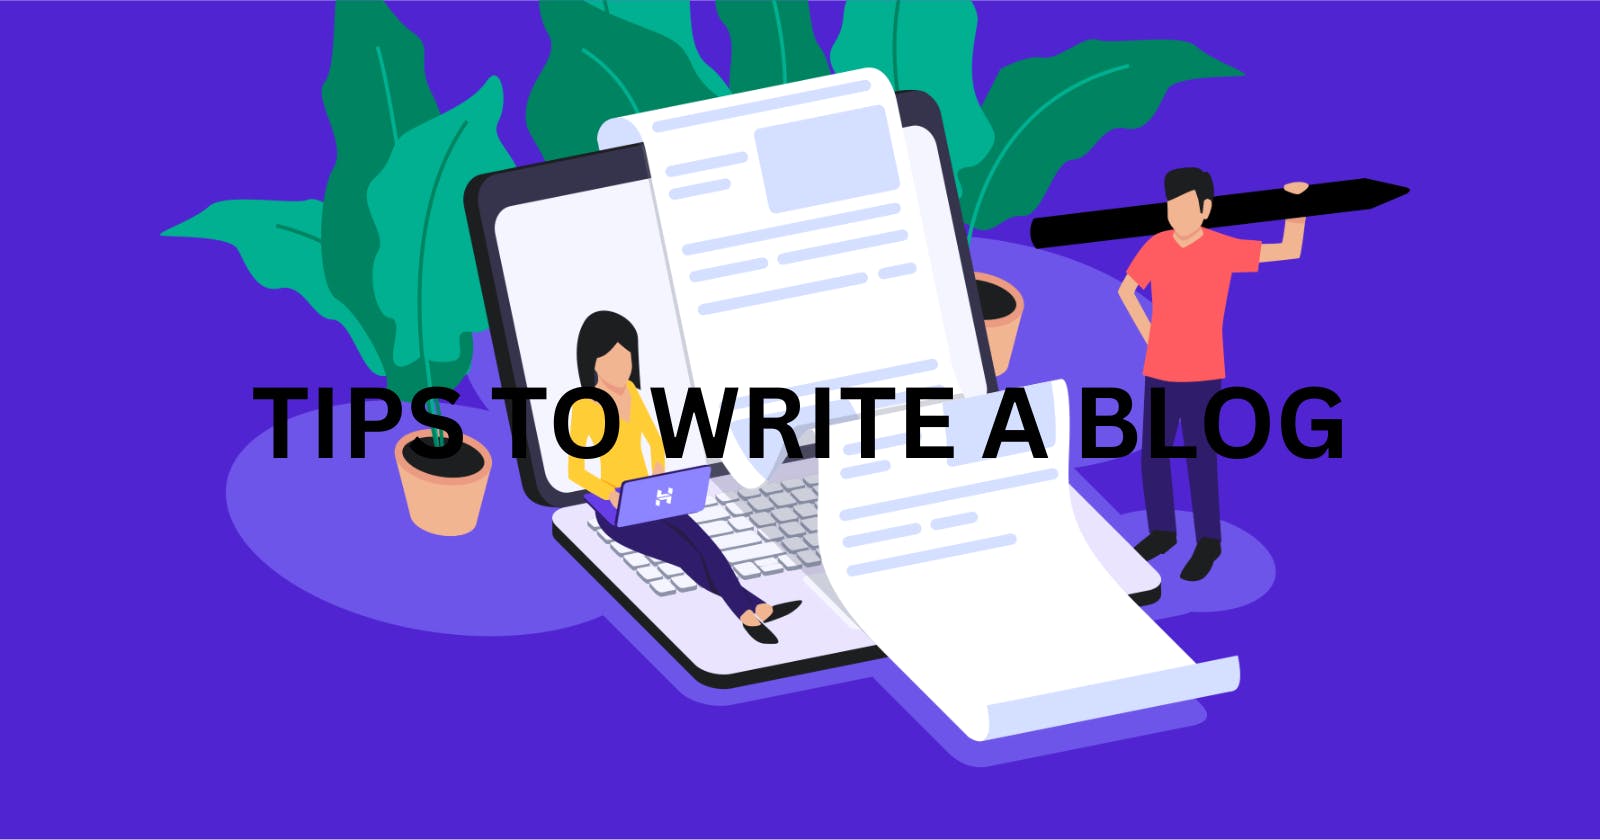 Tips To Write a Blog